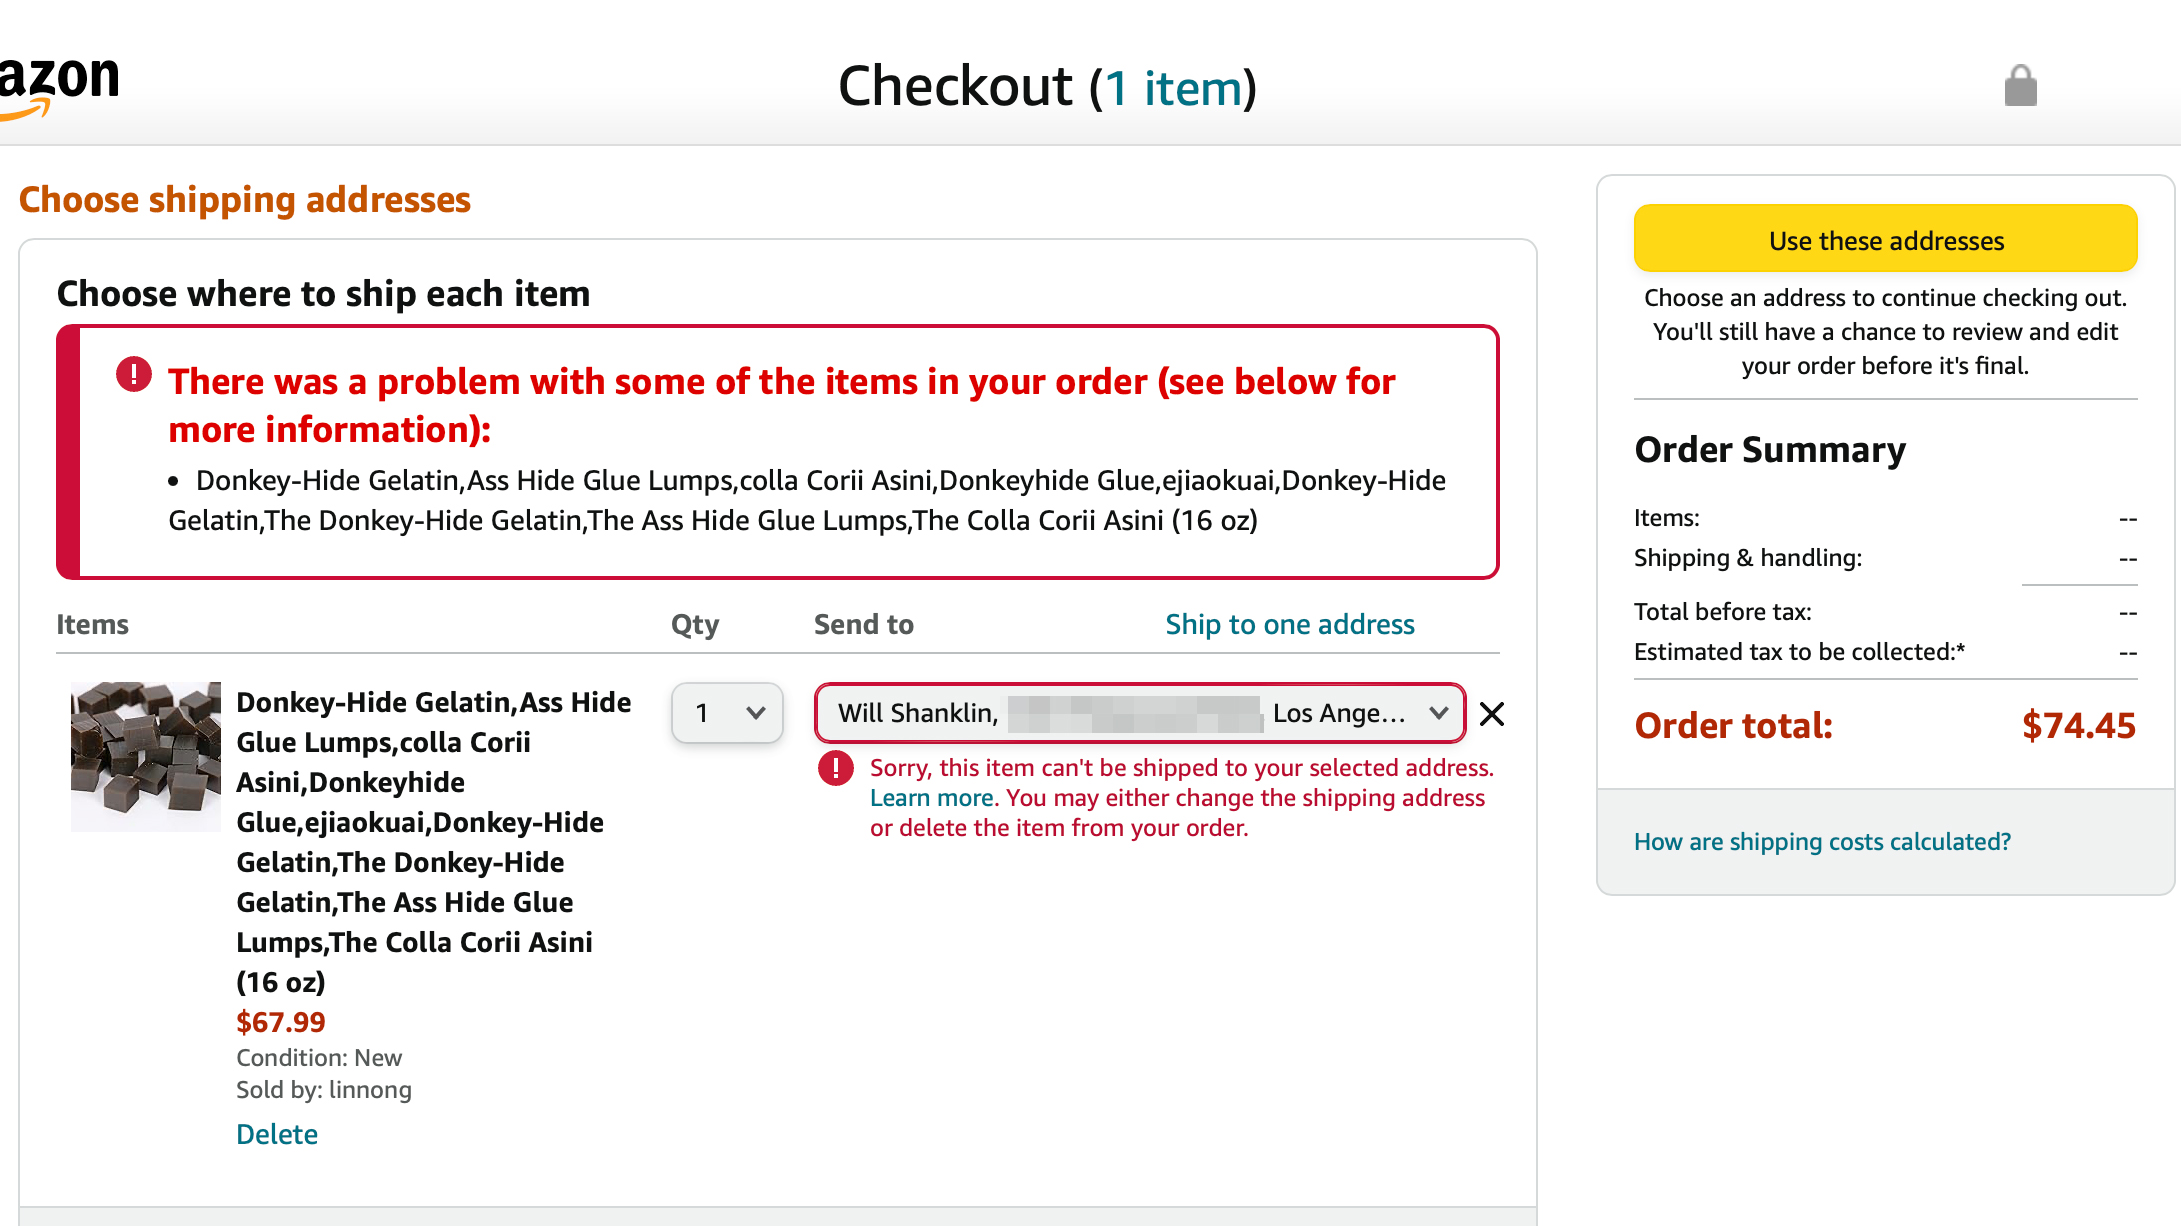 Screenshot of an Amazon error message during checkout.  Refuses to ship a gelatin product made from donkeys to an address in Los Angeles, CA.